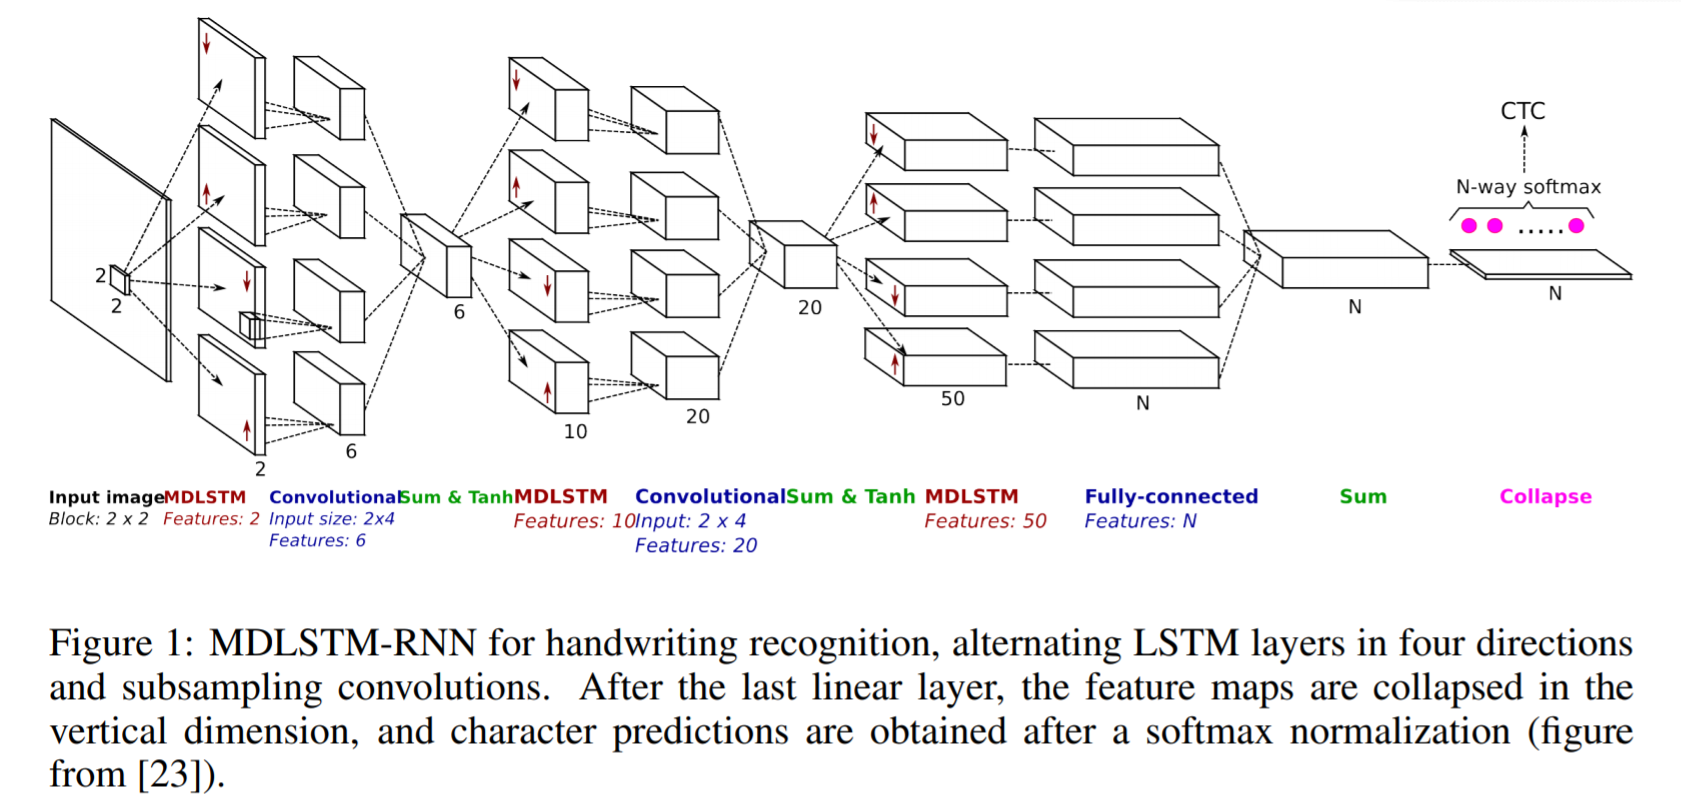 Line layering. Linear layer. Линейные слои (Linear layers).. Neural Network for handwriting recognition. Handwriting recognition.